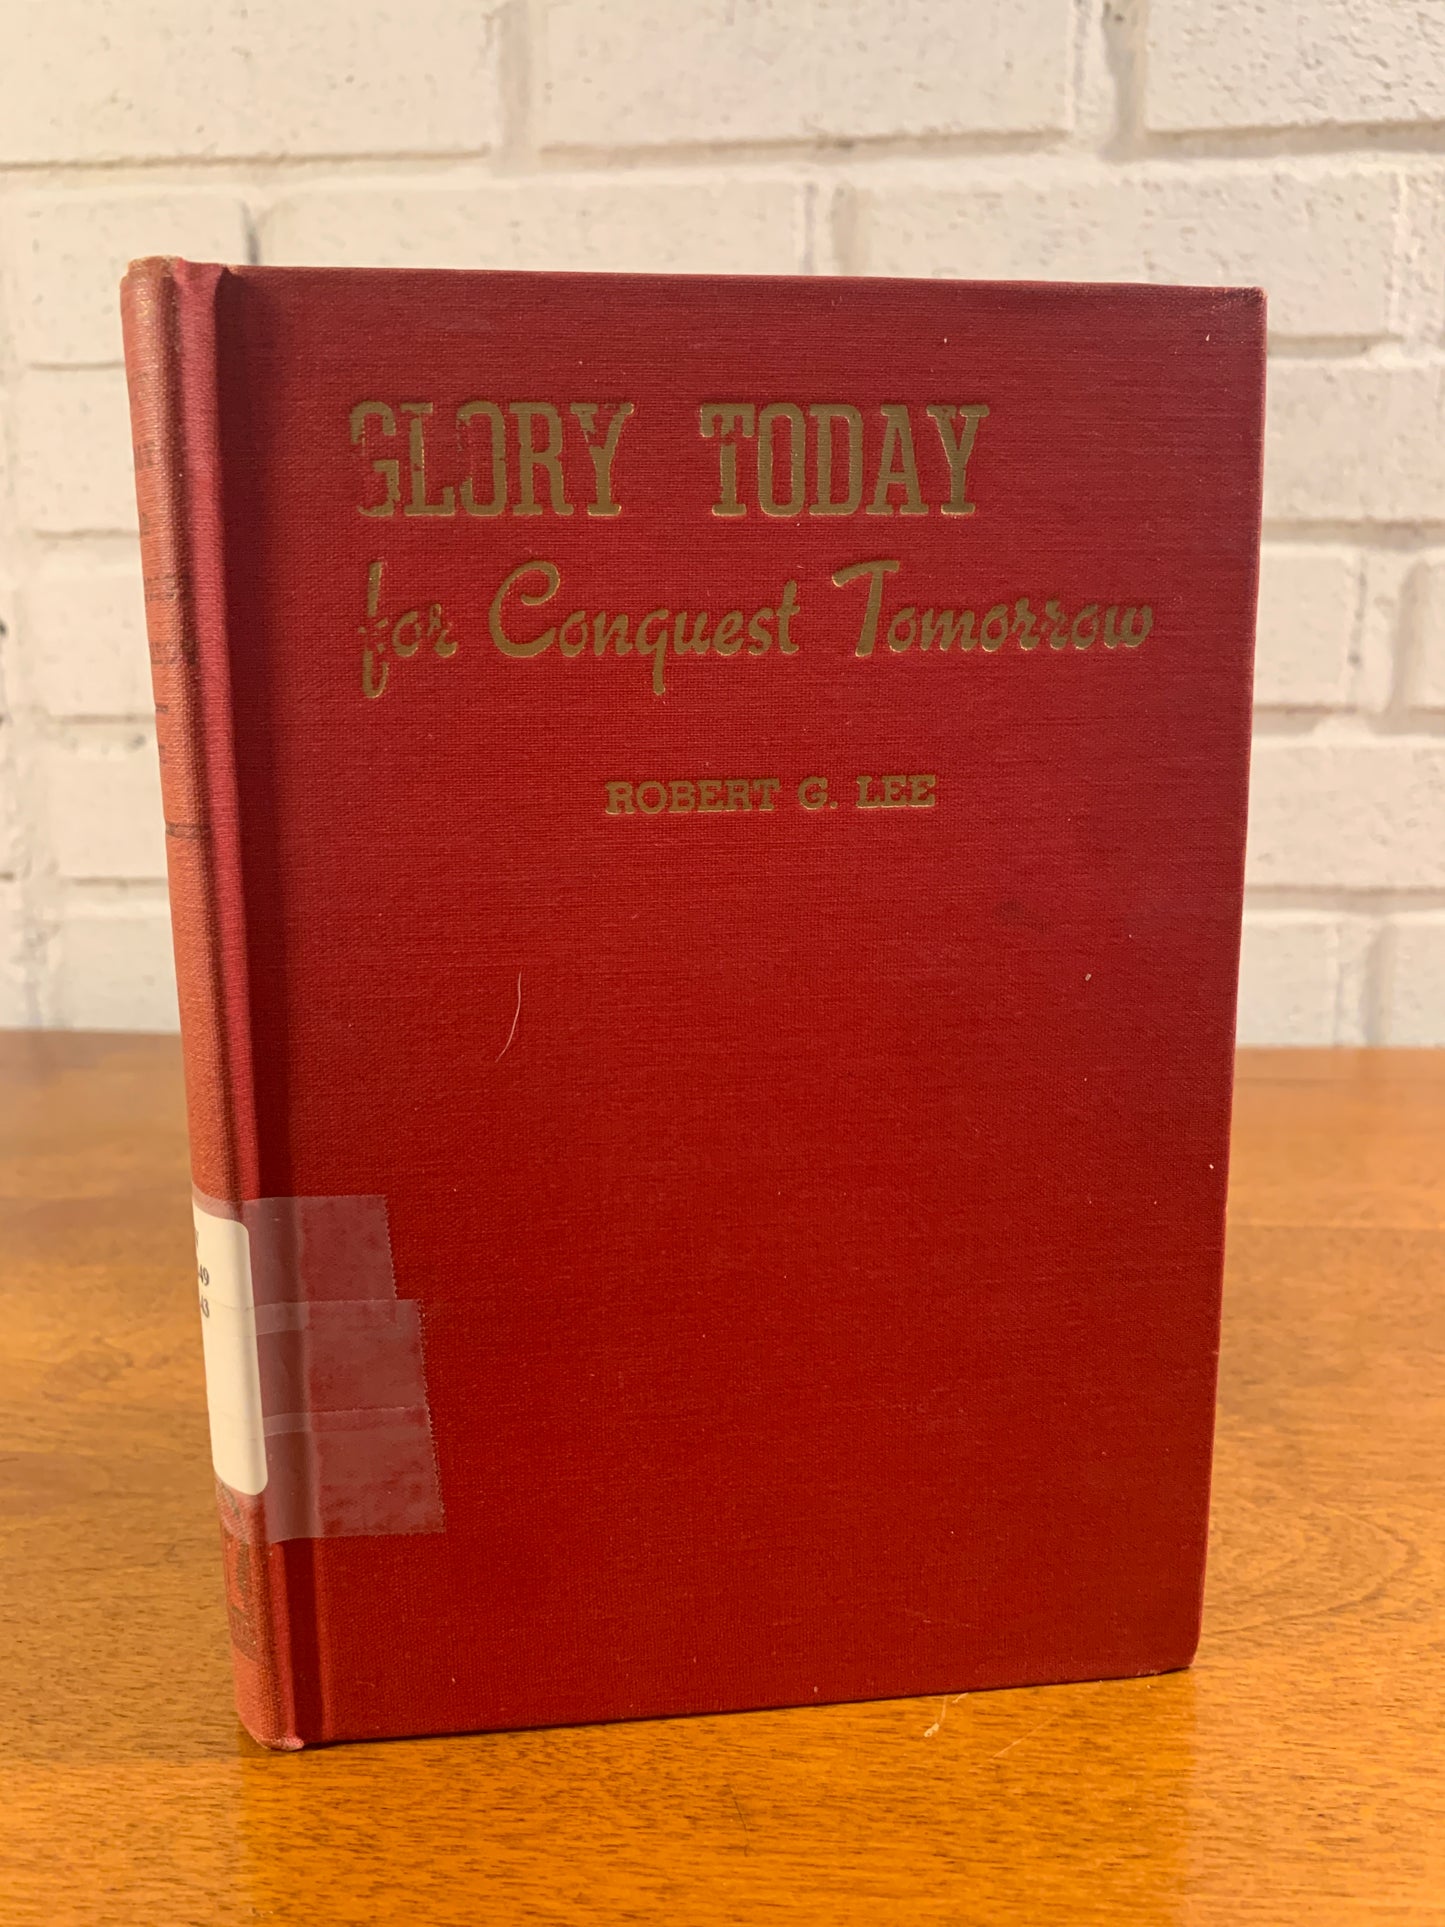 Glory Today For Conquest Tomorrow by Robert C. Lee, 1941